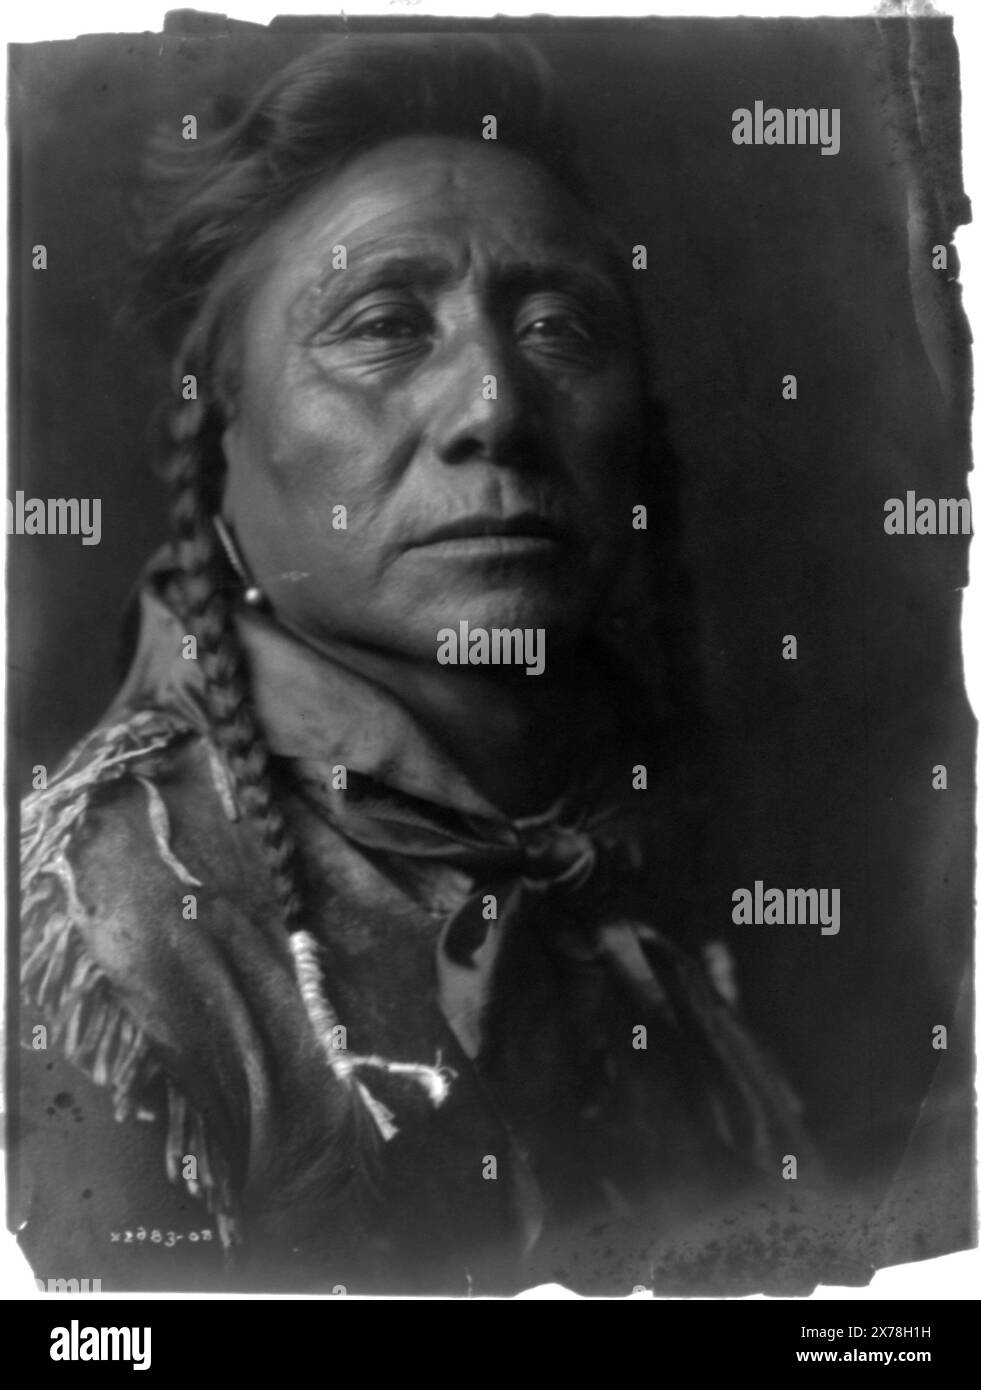 Coups Well Known Apsaroke, Curtis no. 2683-08., Forms part of: Edward S. Curtis Collection ., Published in: The North American Indian / Edward S. Curtis. [Seattle, Wash.] : Edward S. Curtis, 1907-30, Suppl., v. 4, pl. 144.. Indians of North America, 1900-1910. , Crow Indians, 1900-1910. , Braids (Hairdressing), 1900-1910. Stock Photo